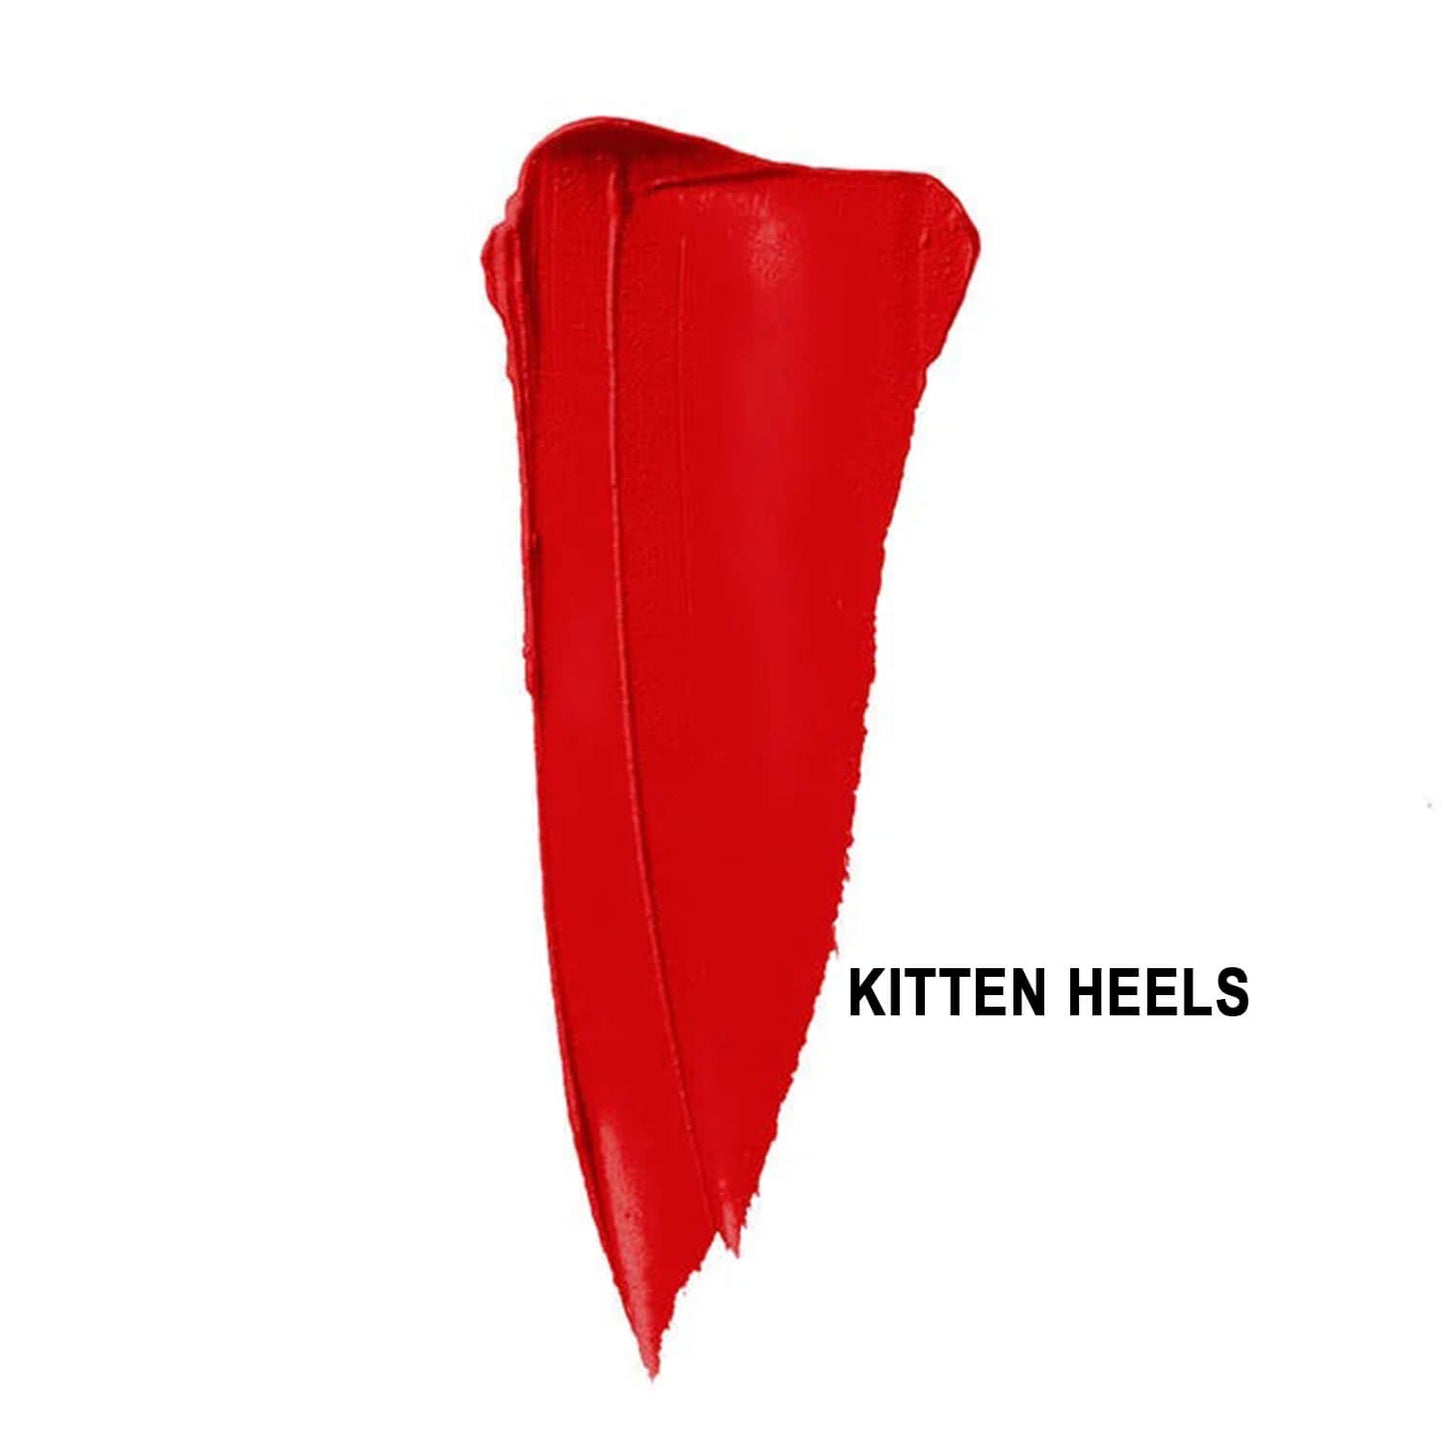 NYX Liquid Suede Cream Lipstick swatch of kitten heels available at Heygirl.pk for delivery in Pakistan